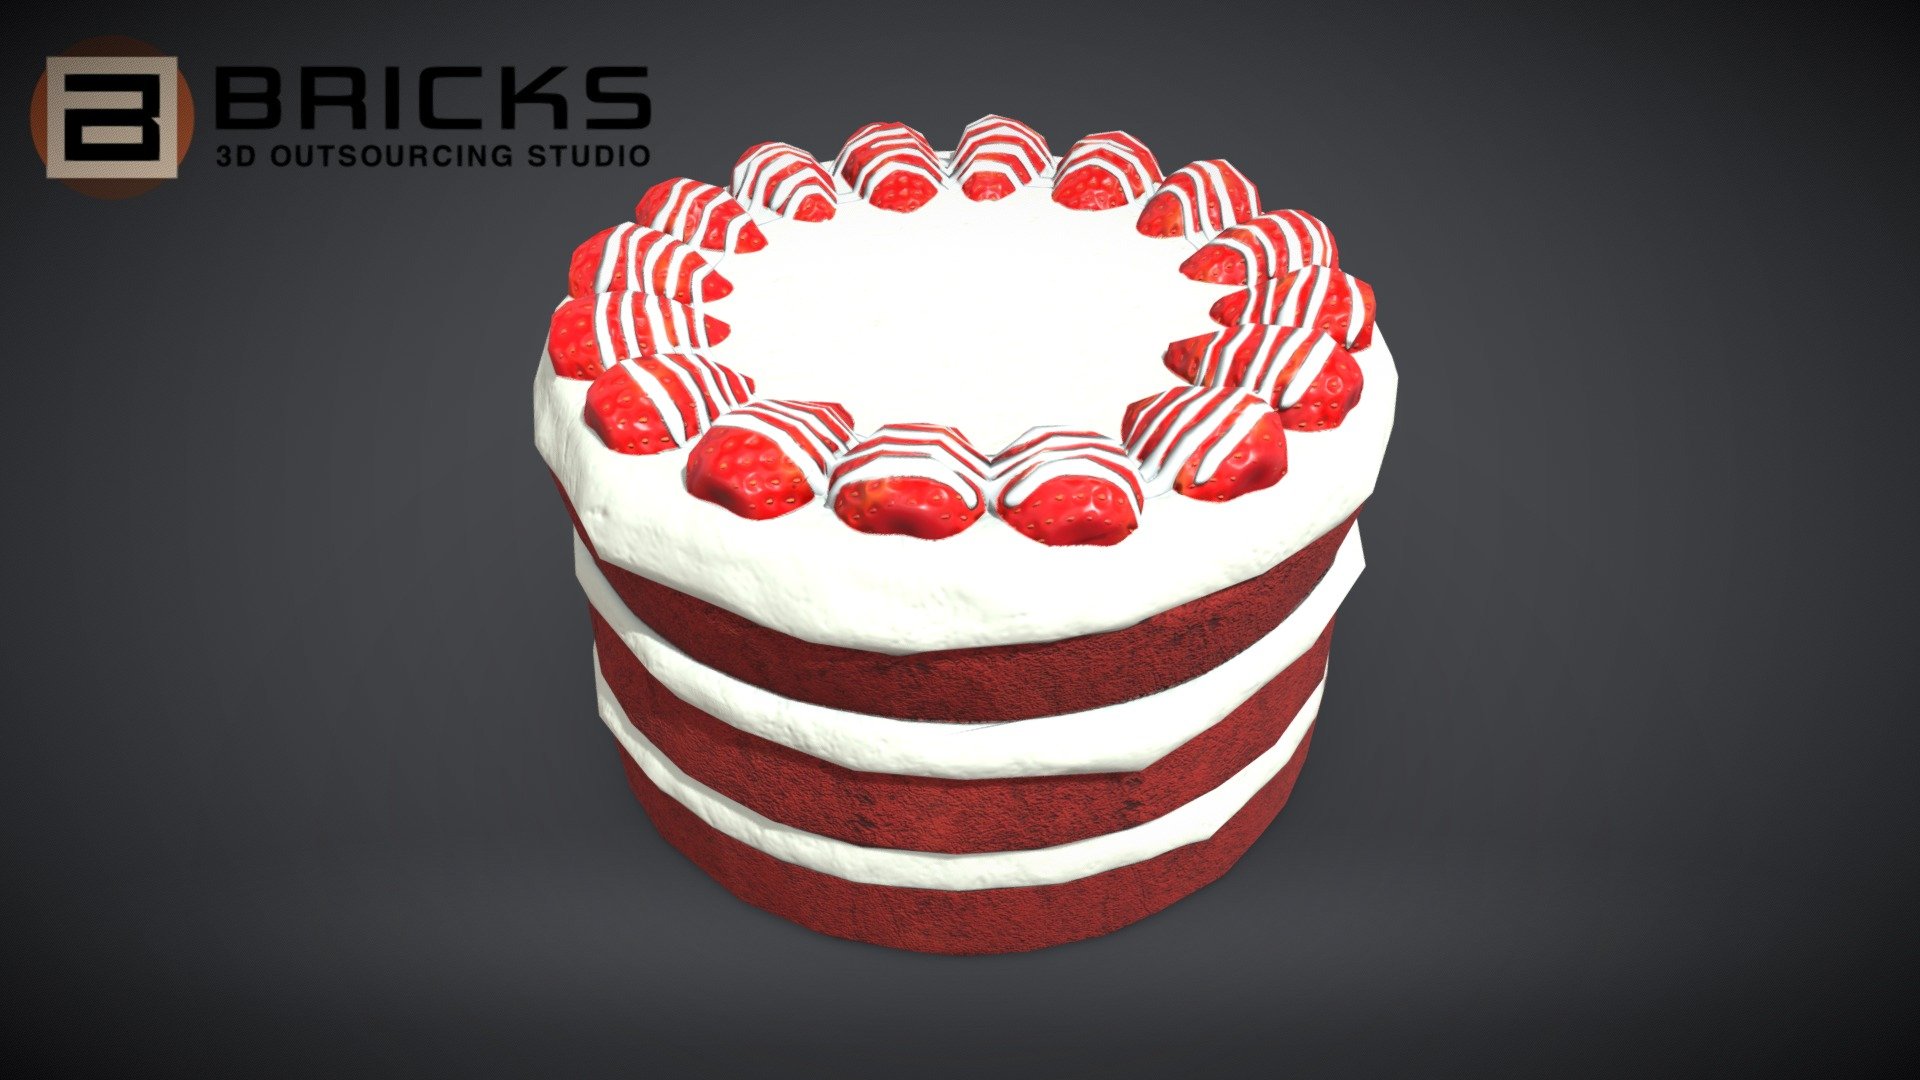 PBR Food Asset:
RedVelvetCake
Polycount: 1718
Vertex count: 861
Texture Size: 2048px x 2048px
Normal: OpenGL

If you need any adjust in file please contact us: team@bricks3dstudio.com

Hire us: tringuyen@bricks3dstudio.com
Here is us: https://www.bricks3dstudio.com/
        https://www.artstation.com/bricksstudio
        https://www.facebook.com/Bricks3dstudio/
        https://www.linkedin.com/in/bricks-studio-b10462252/ - RedVelvetCake - Buy Royalty Free 3D model by Bricks Studio (@bricks3dstudio) 3d model